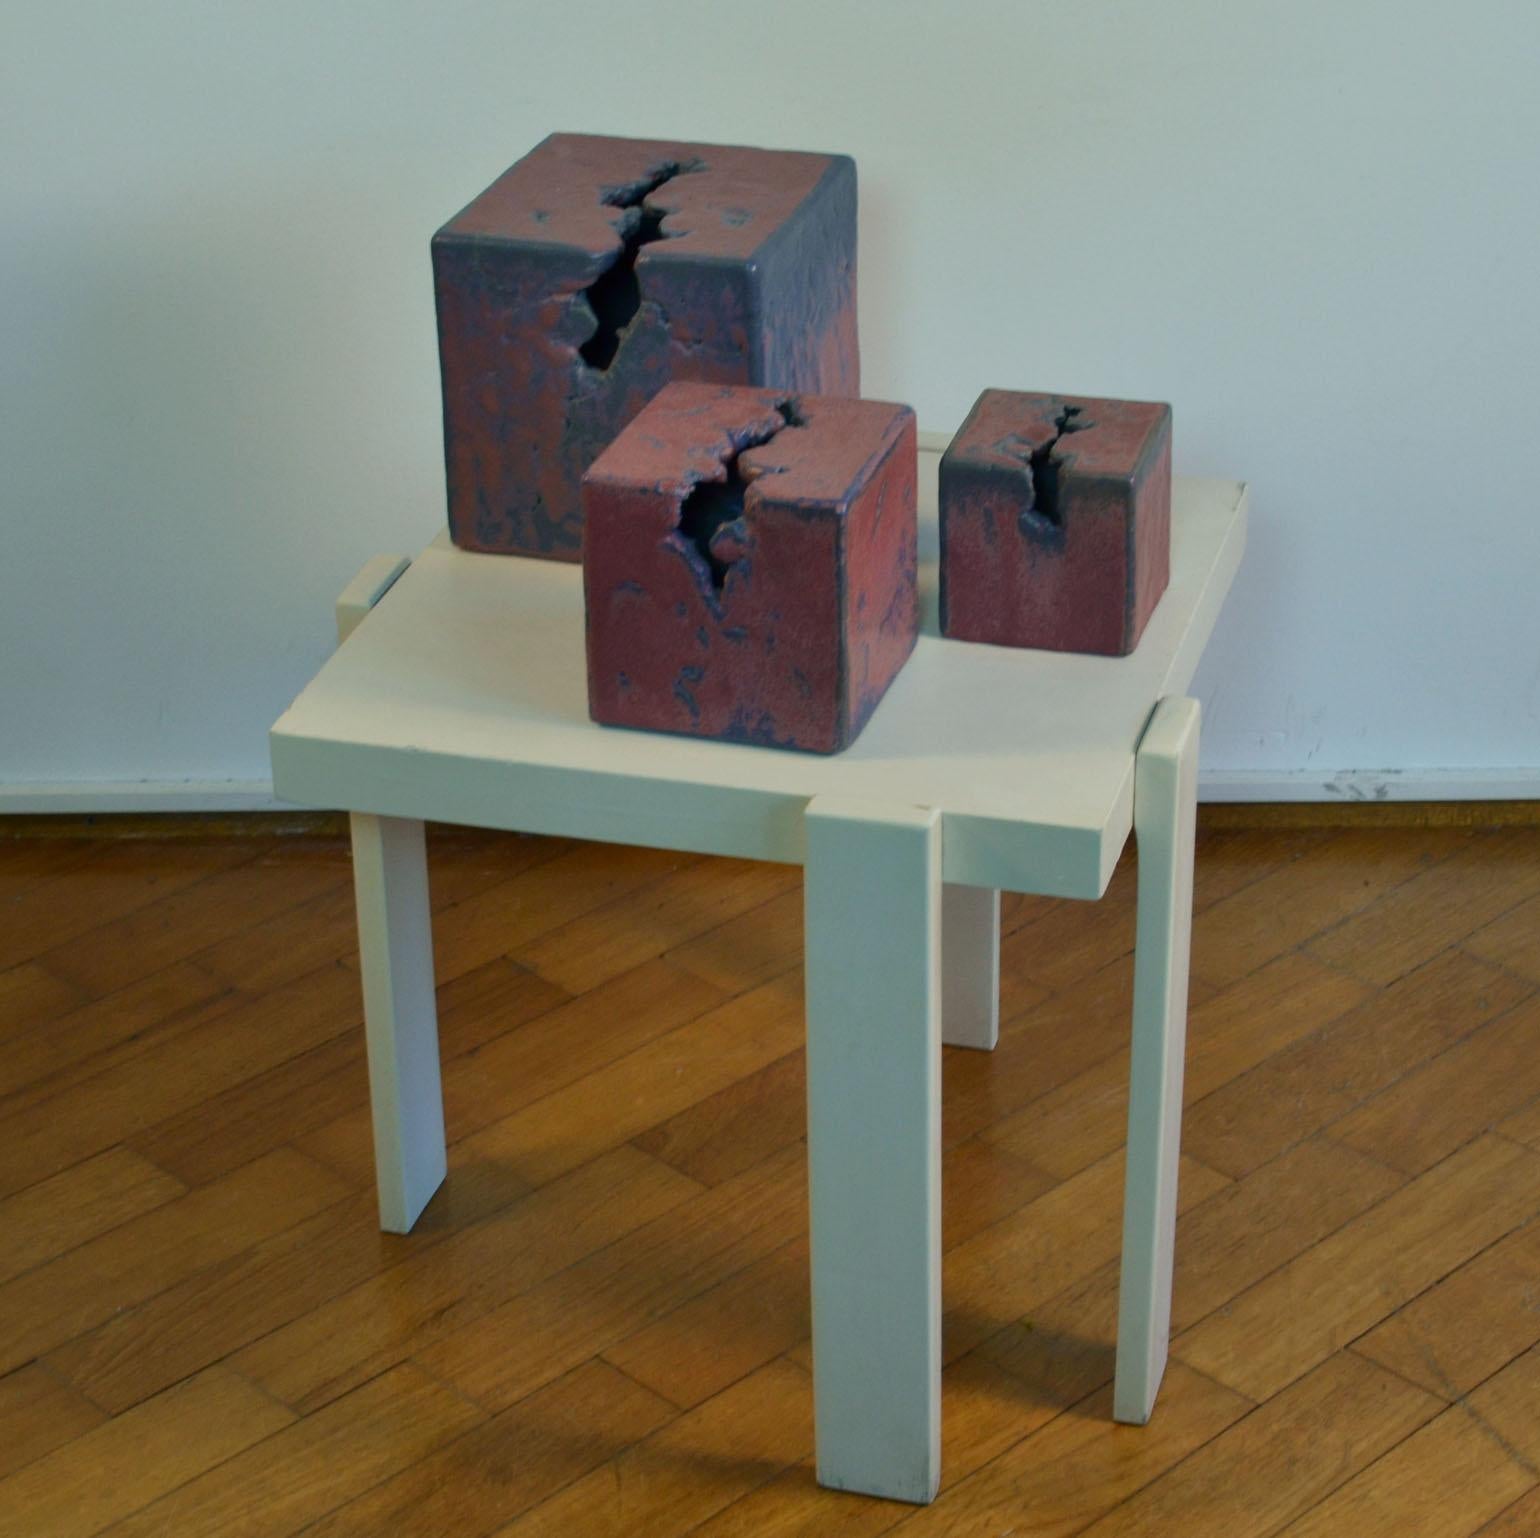 European Set of Three Abstract Ceramic Cube Sculptures For Sale